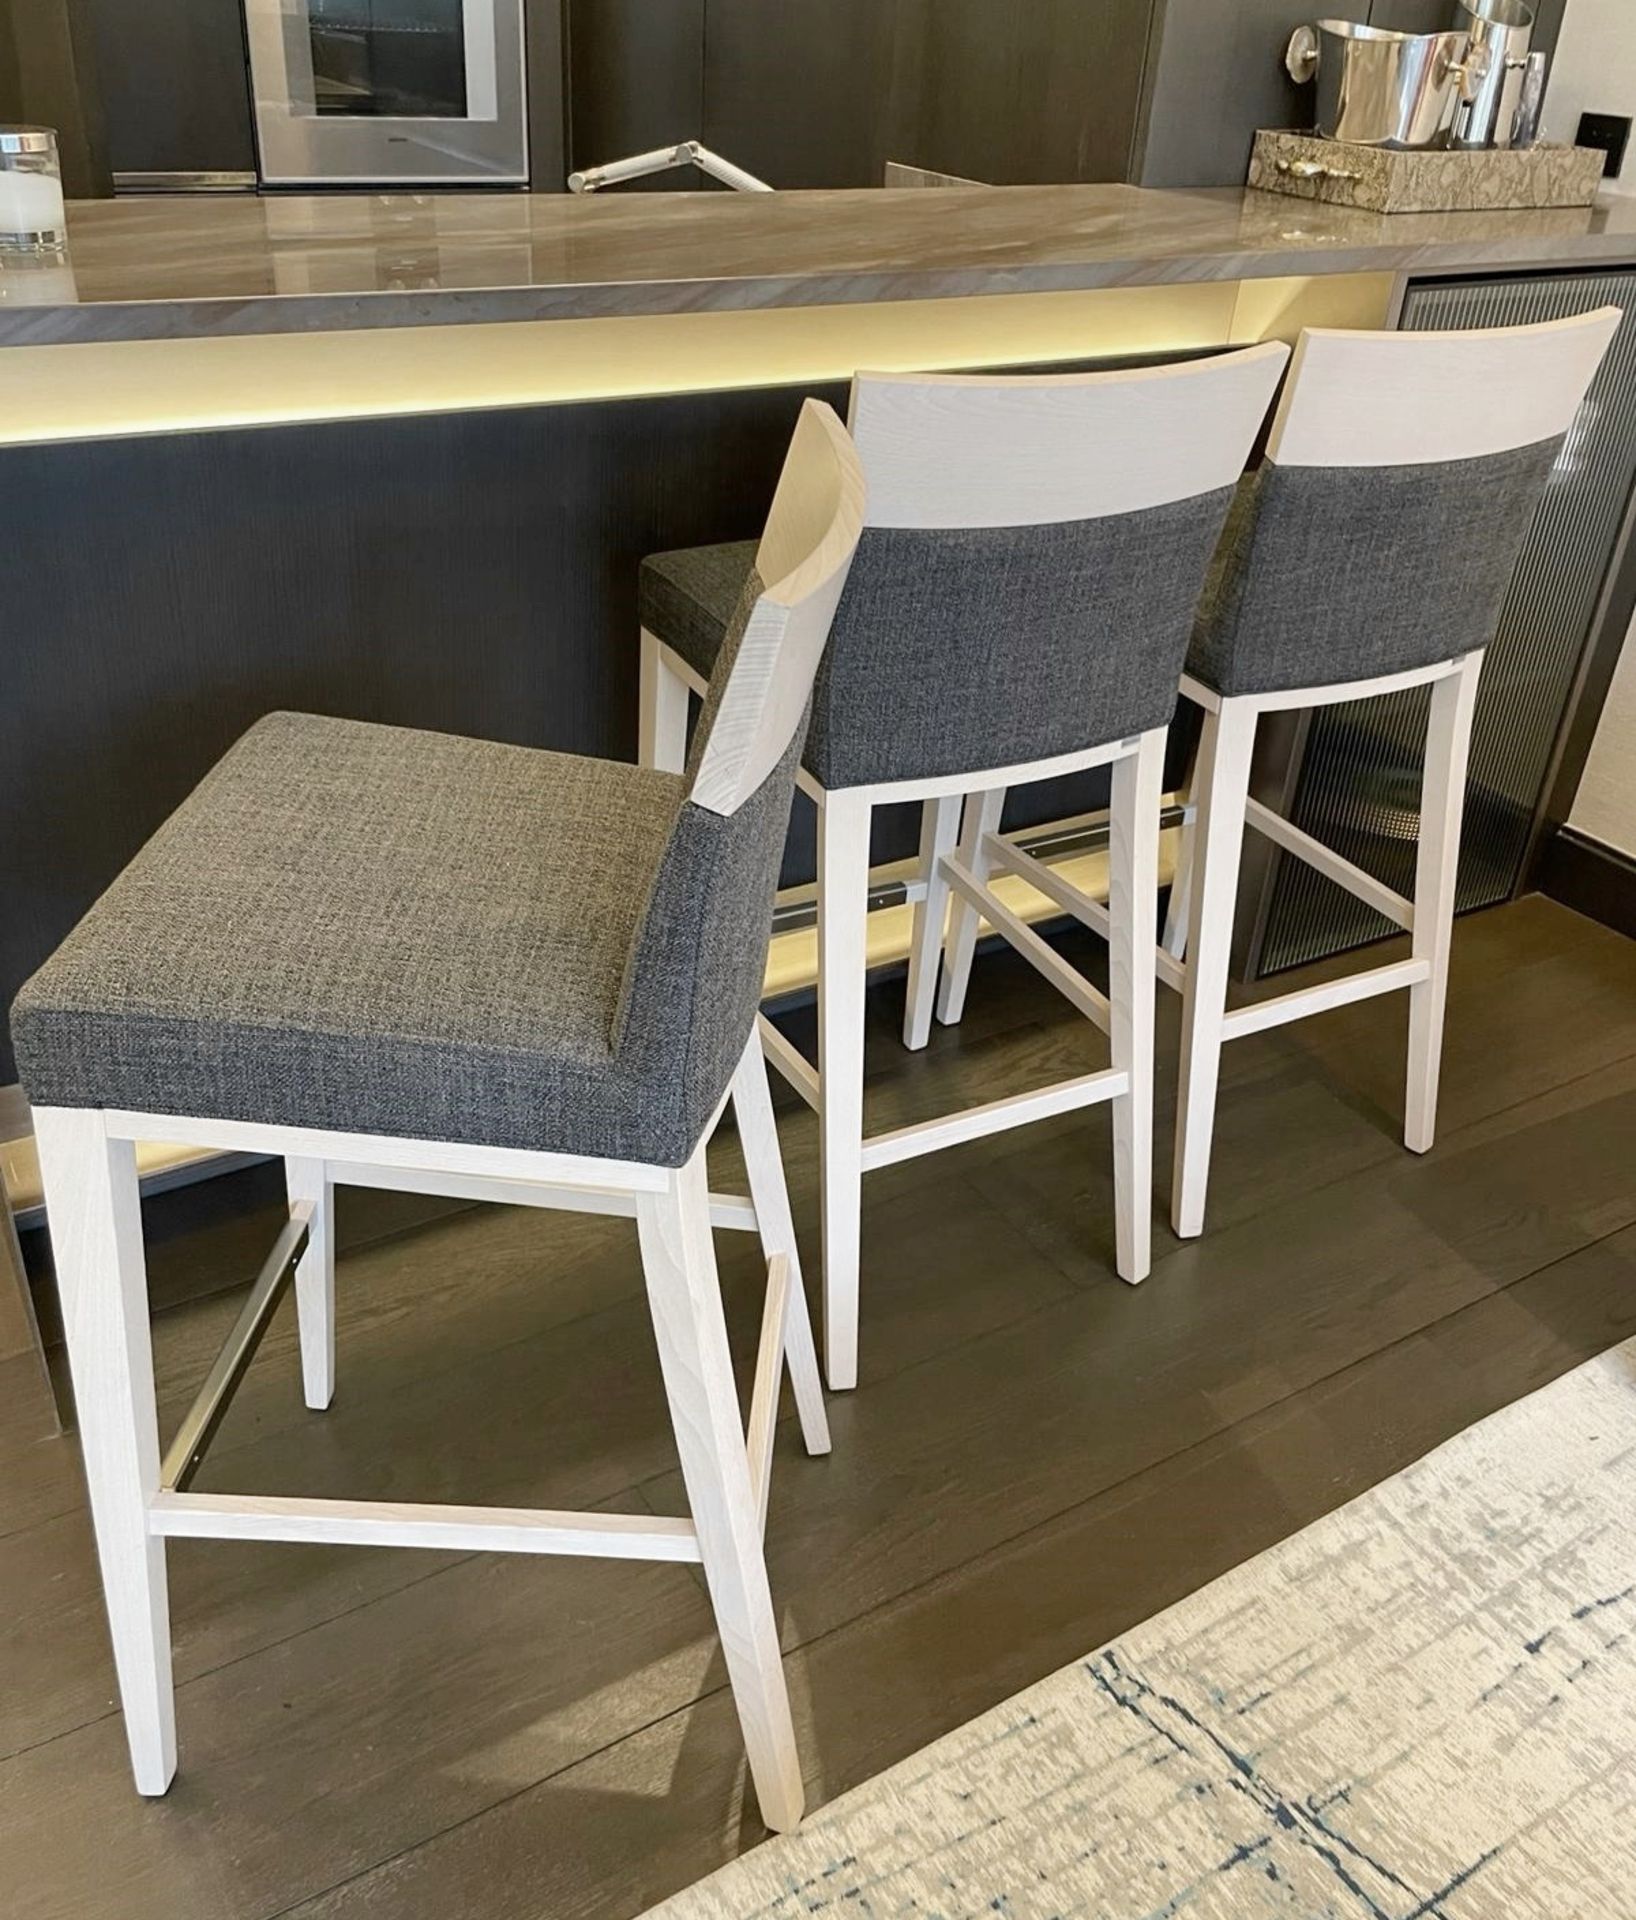 3 x MONTBEL Designer Bar Stools With Light Stained Frames And Grey Fabric Upholstery - Image 4 of 18